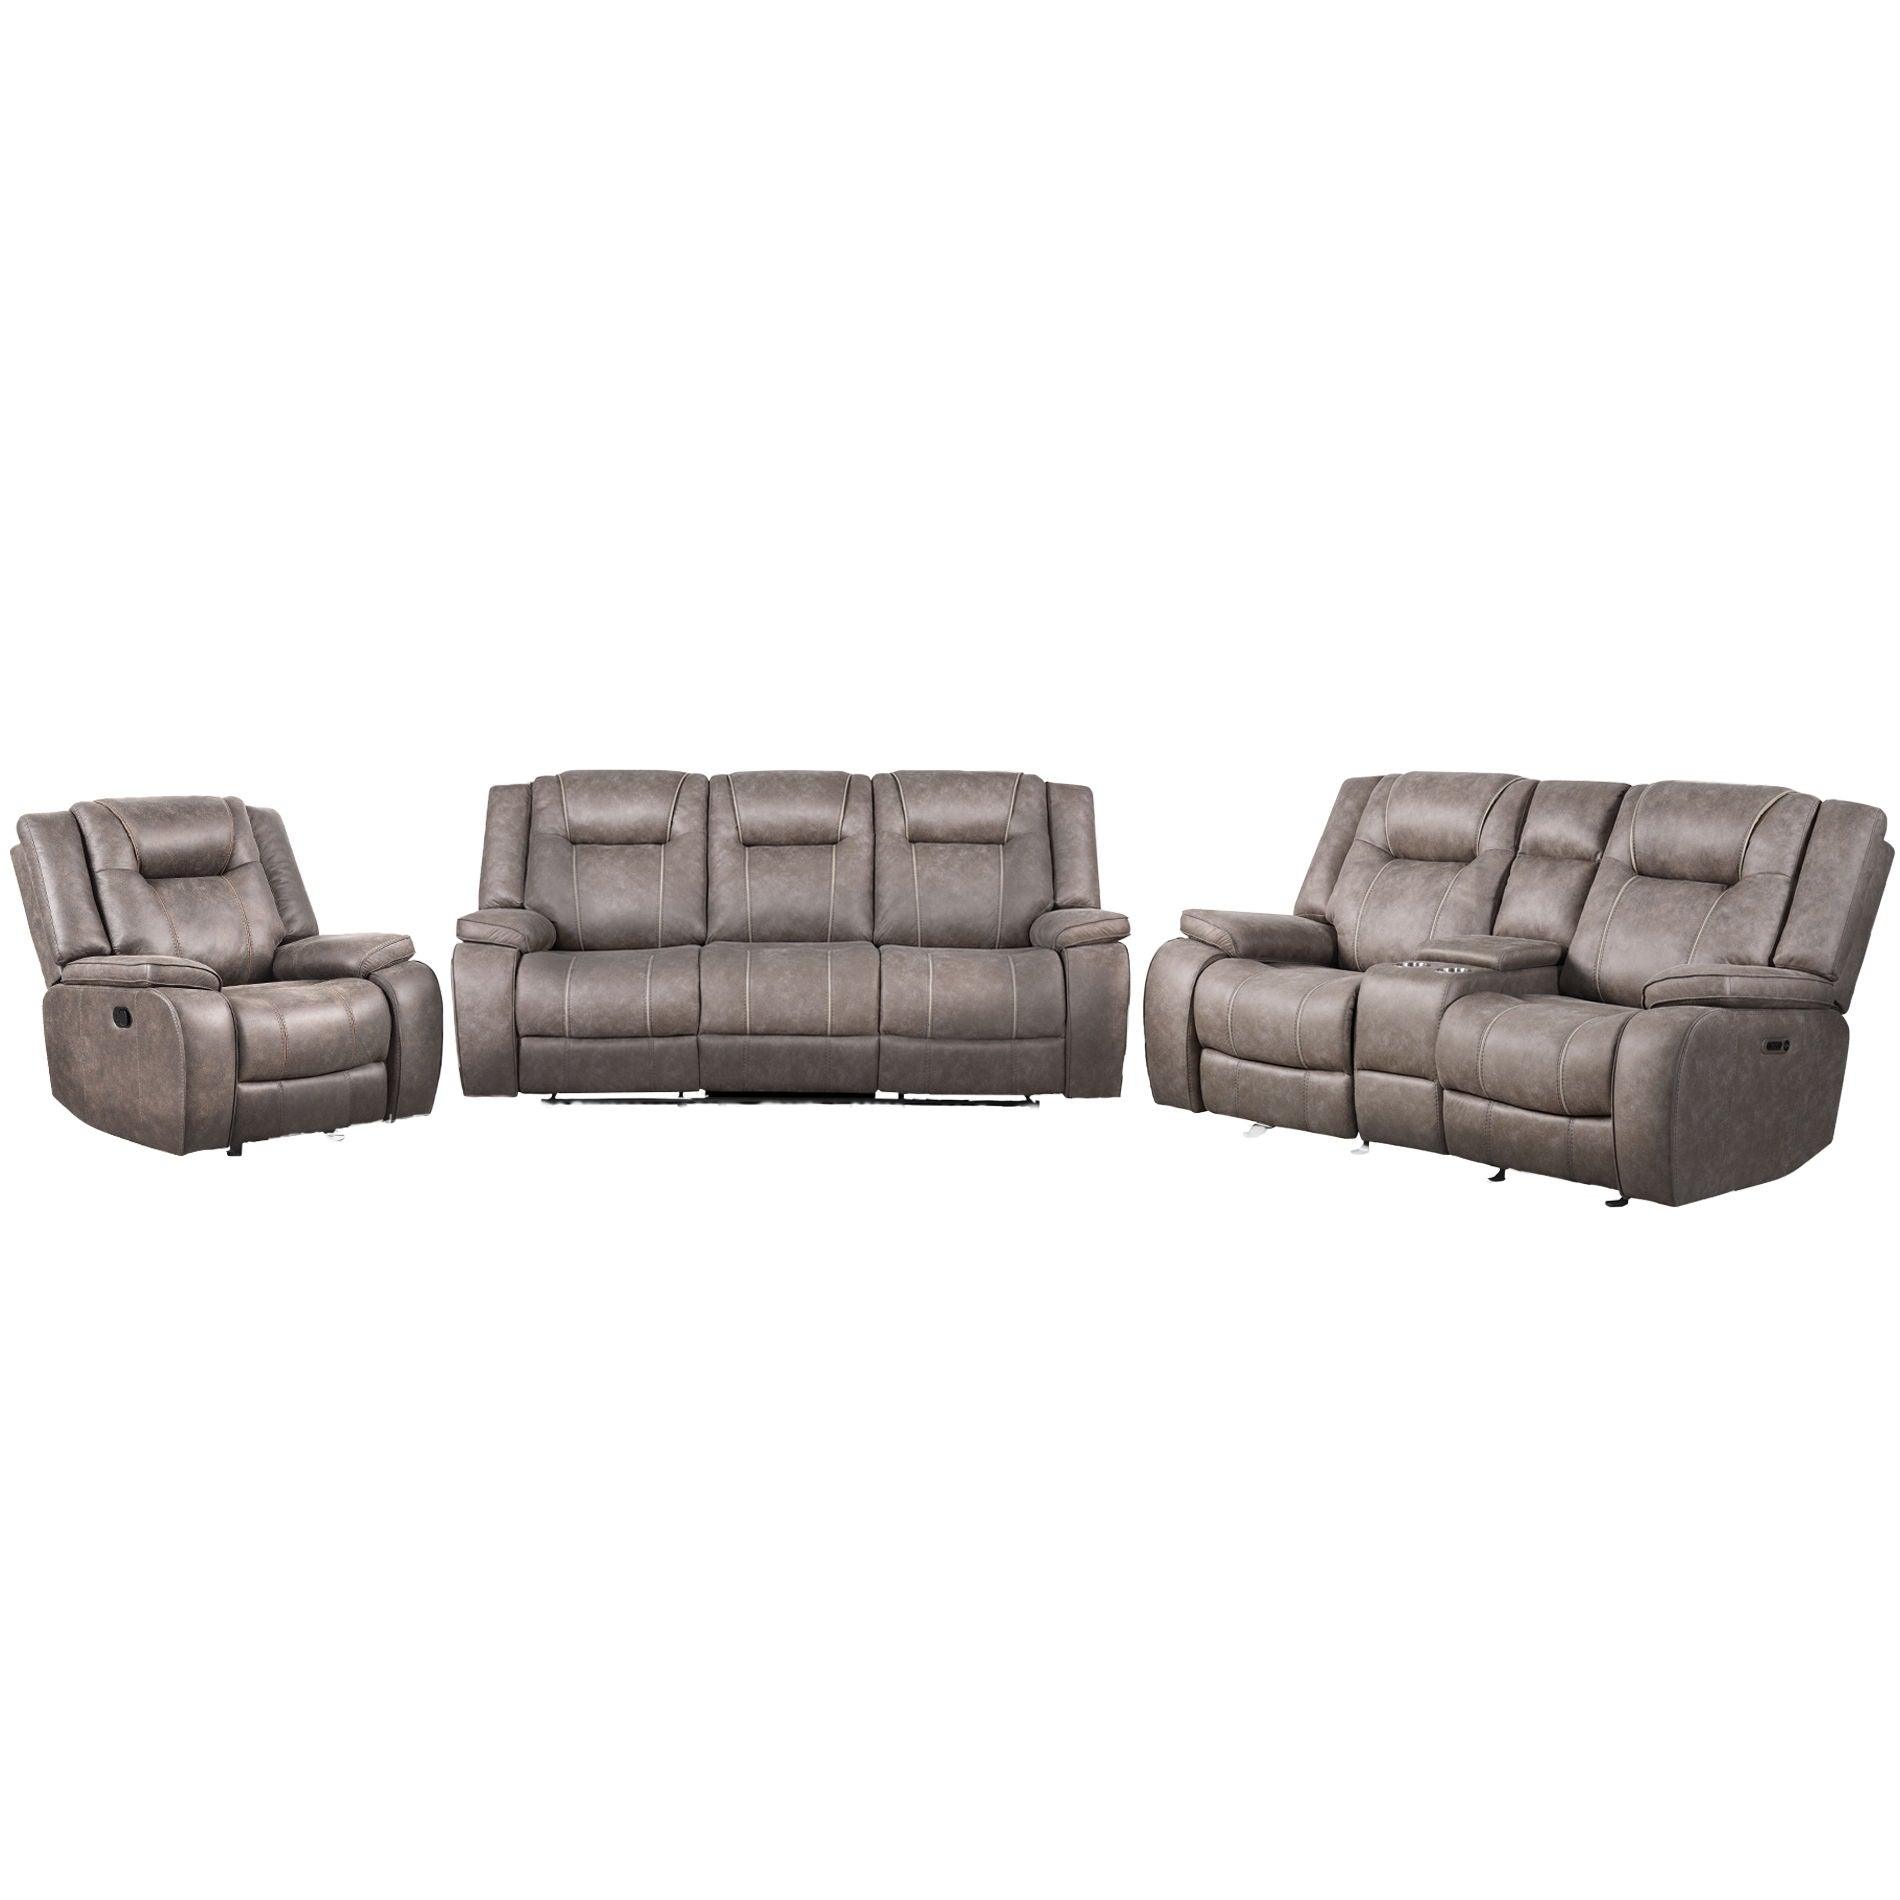 Parker Living - Blake - Manual Reclining Sofa Loveseat And Recliner - Desert Taupe - 5th Avenue Furniture